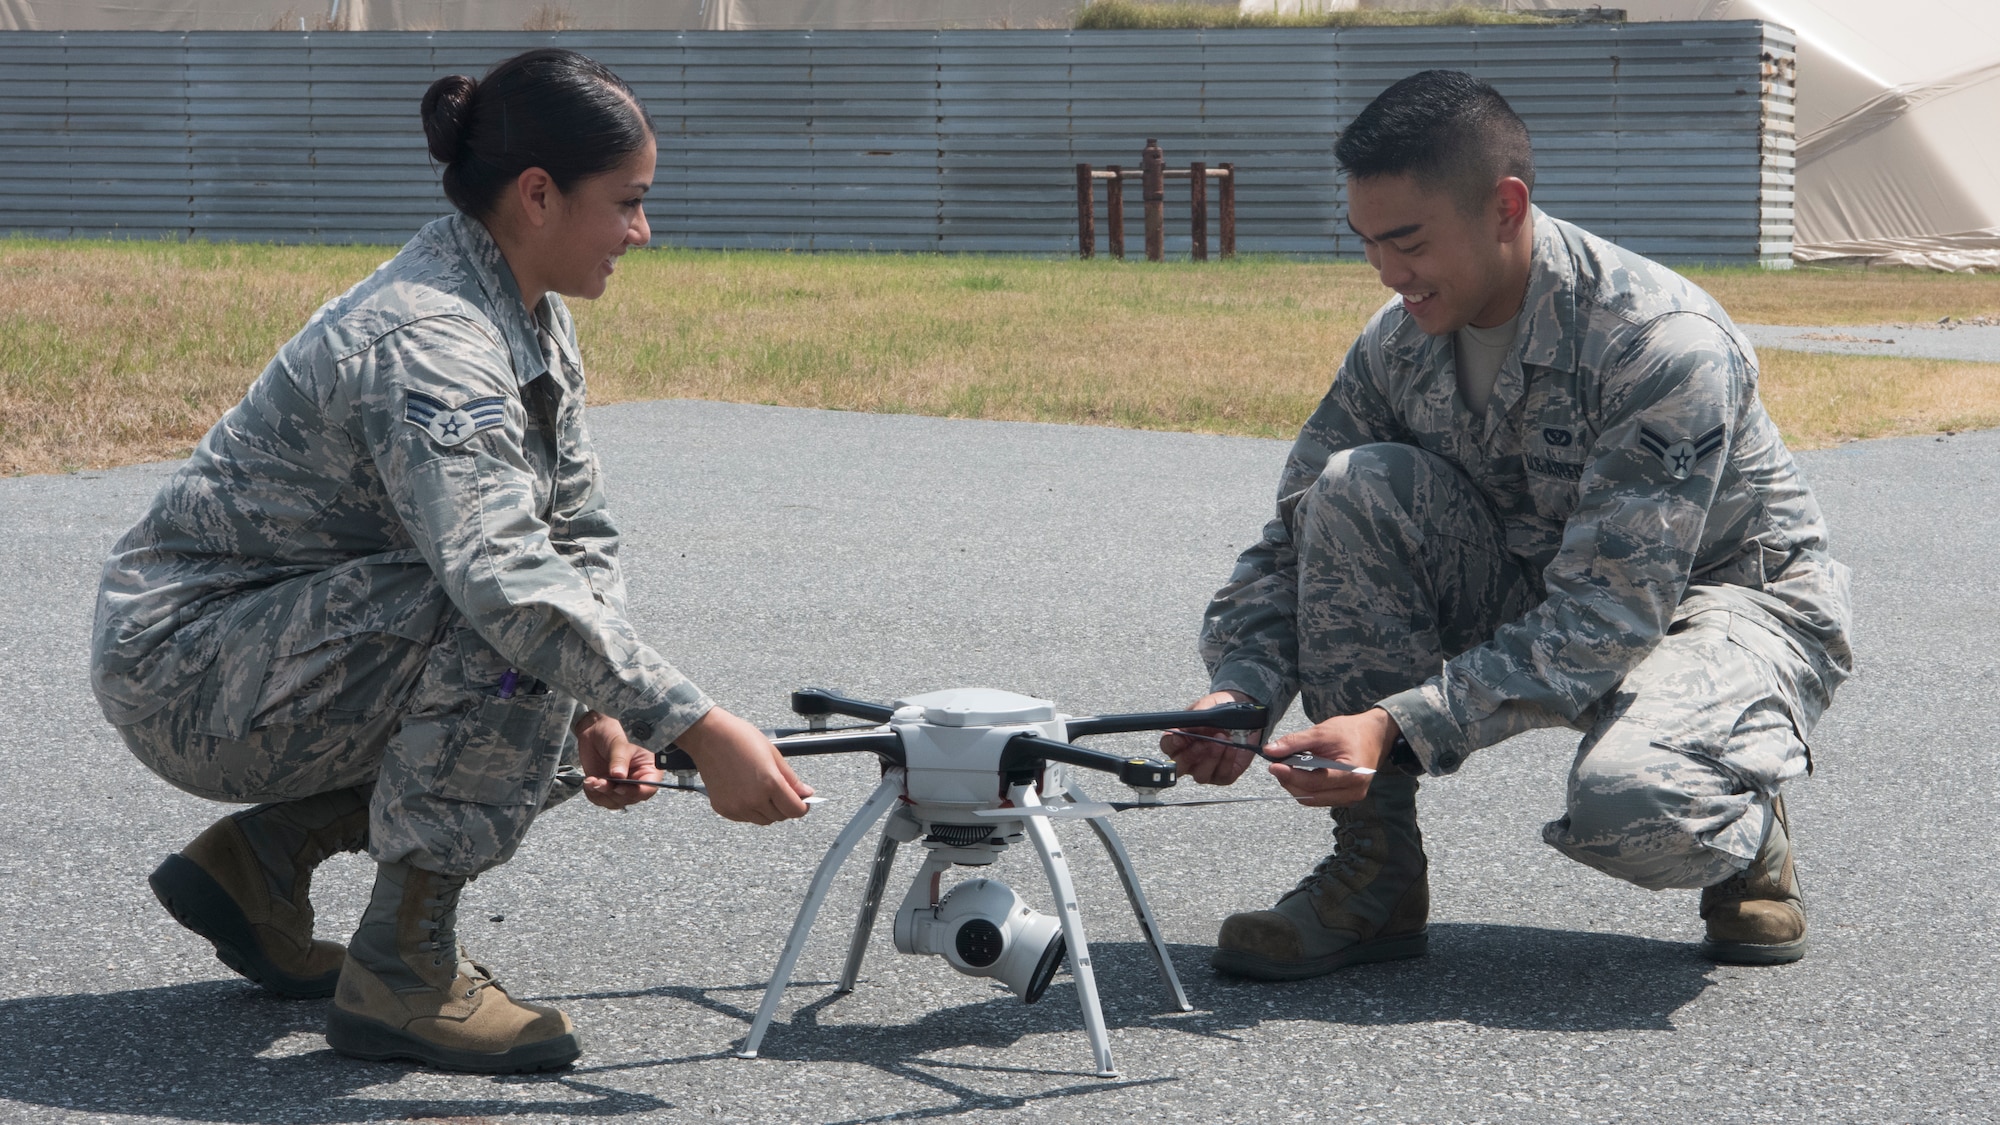 U.S. Air Force Senior Airman Rebecca Garcia (left), and Airman 1st Class Alexander Avenido (right), 8th Civil Engineering Squadron assistant engineering technicians, inspect an Aeryon SkyRanger drone prior to the Air Force’s first-ever operational rapid airfield damage assessment at Kunsan Air Base, Republic of Korea, Aug. 13, 2018. This innovative survey method gives both the engineers and base leadership the capability to have a clear over-head view, rewind and zoom in or out to view the airfield during assessments. (U.S. Air Force photo by Staff Sgt. Levi Rowse)